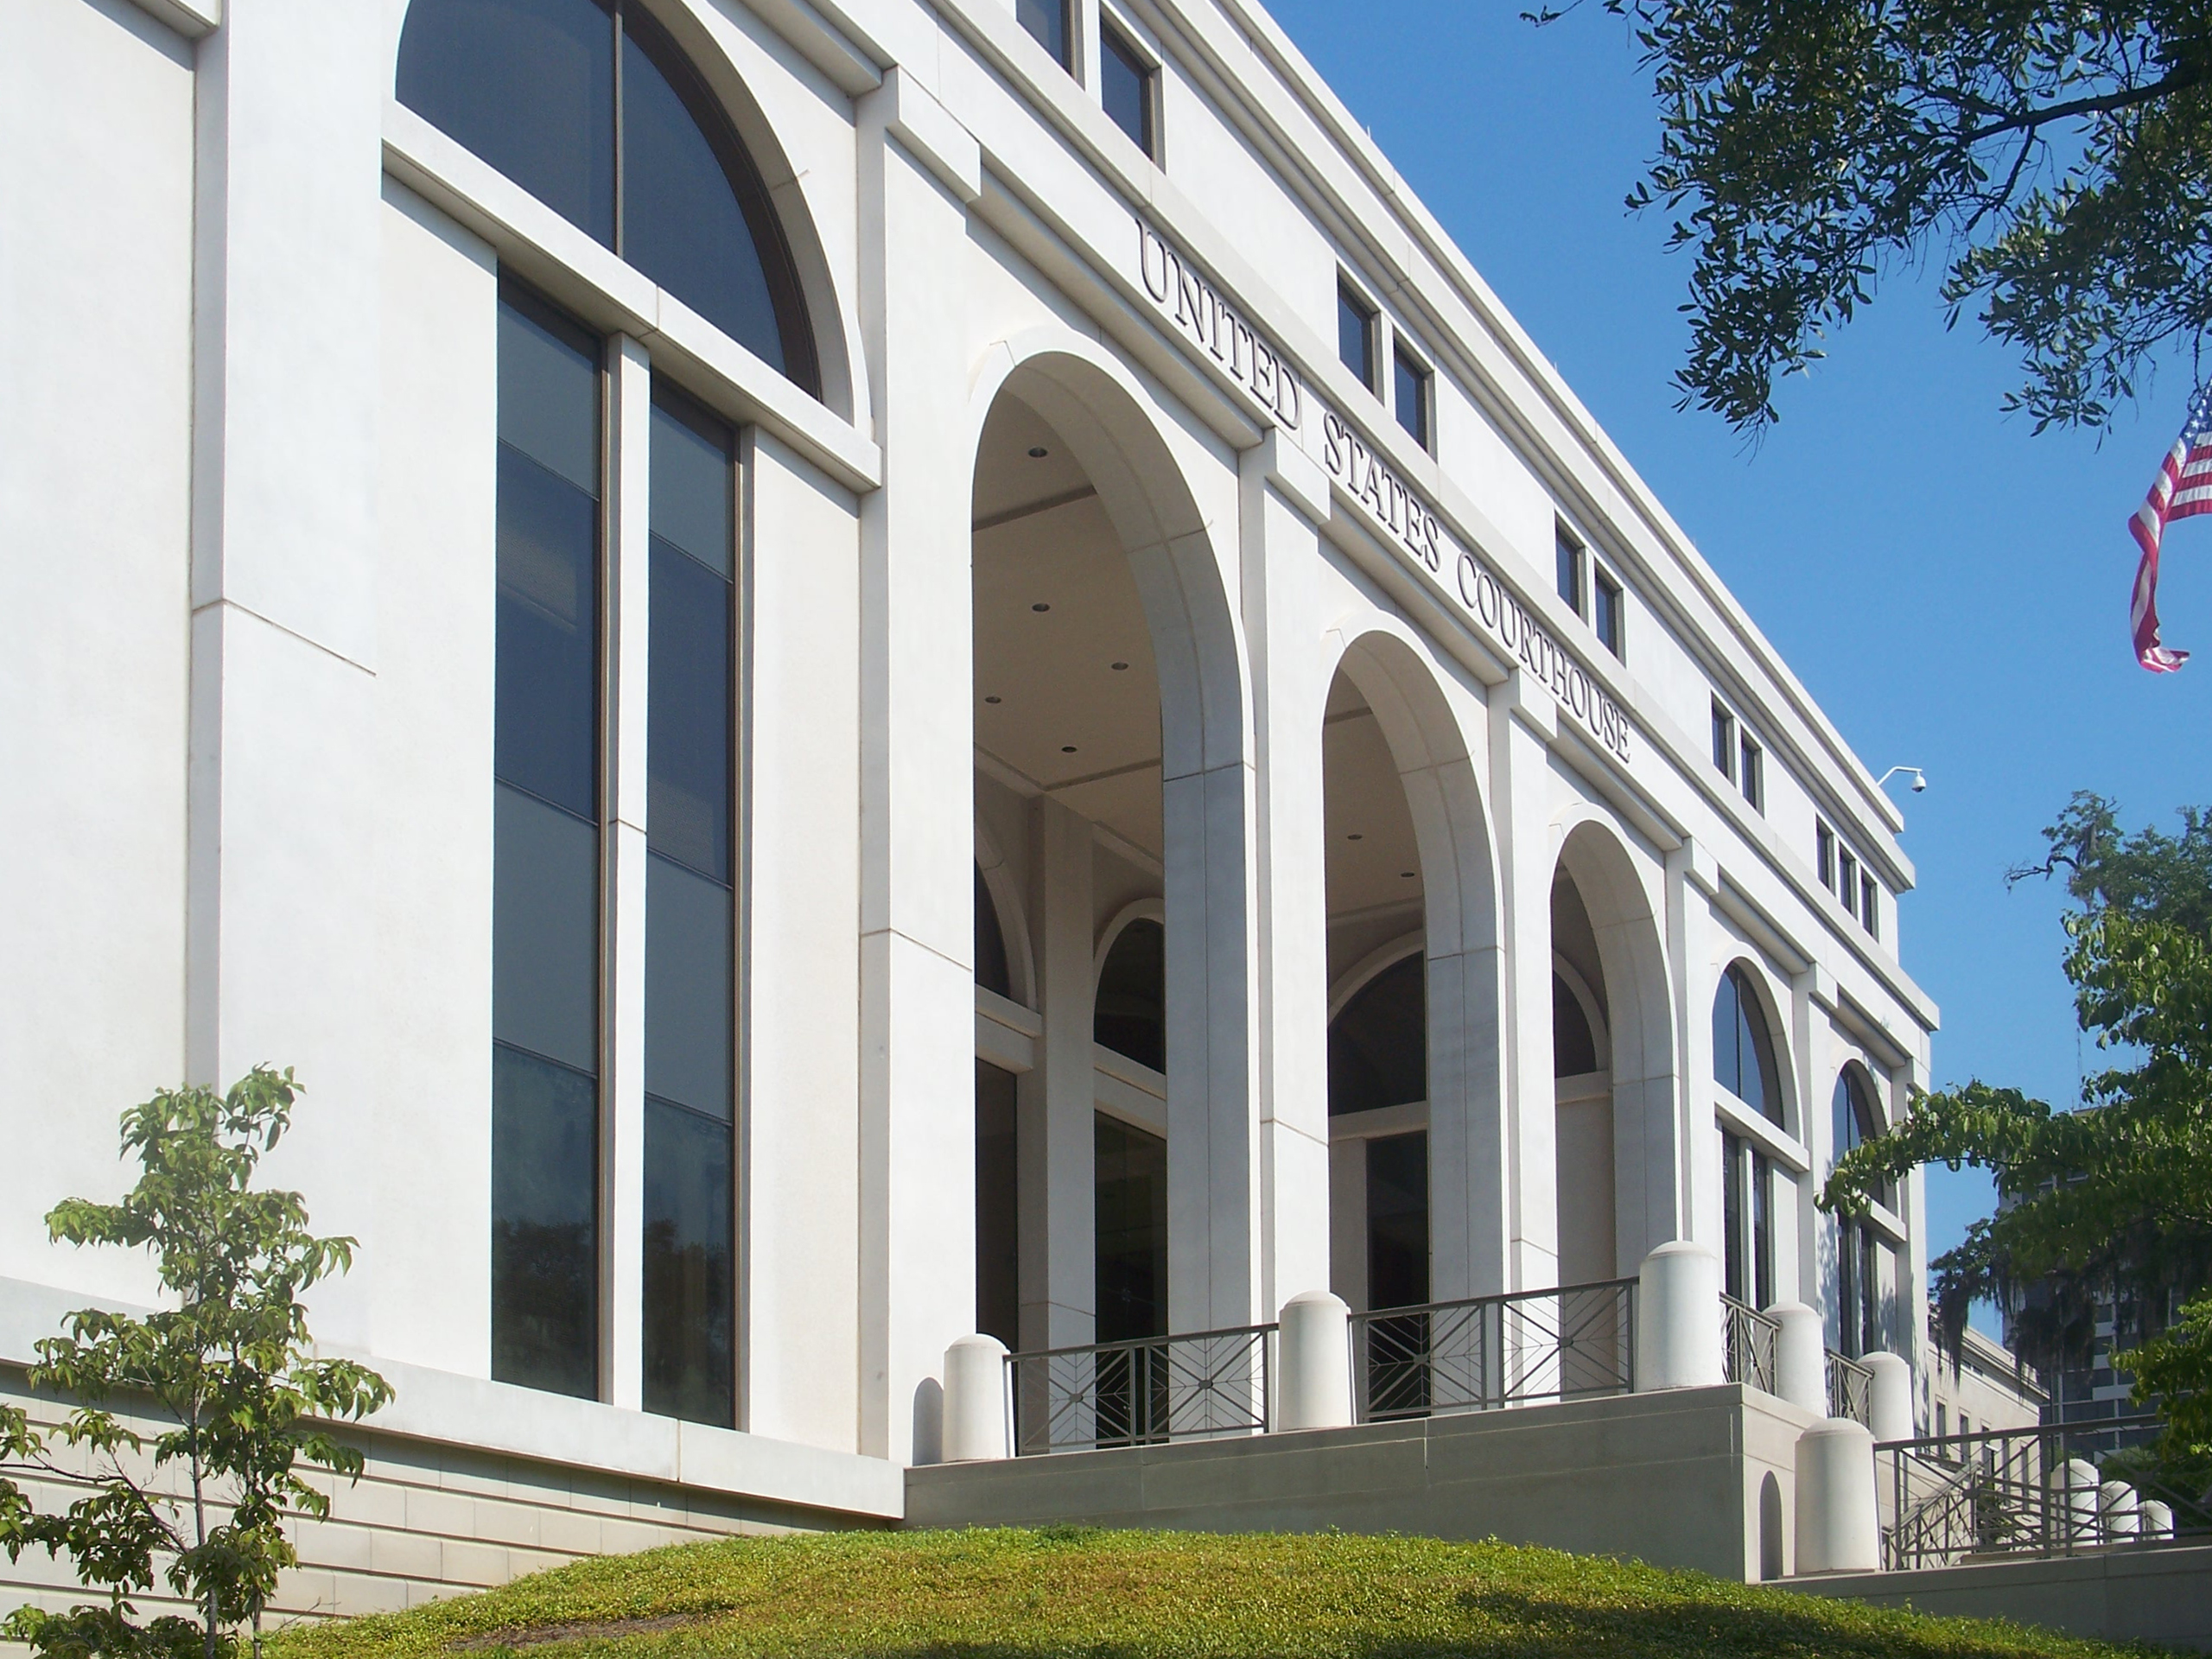 Exterior of the Tallahassee United States Courthouse Annex, white building with several arche